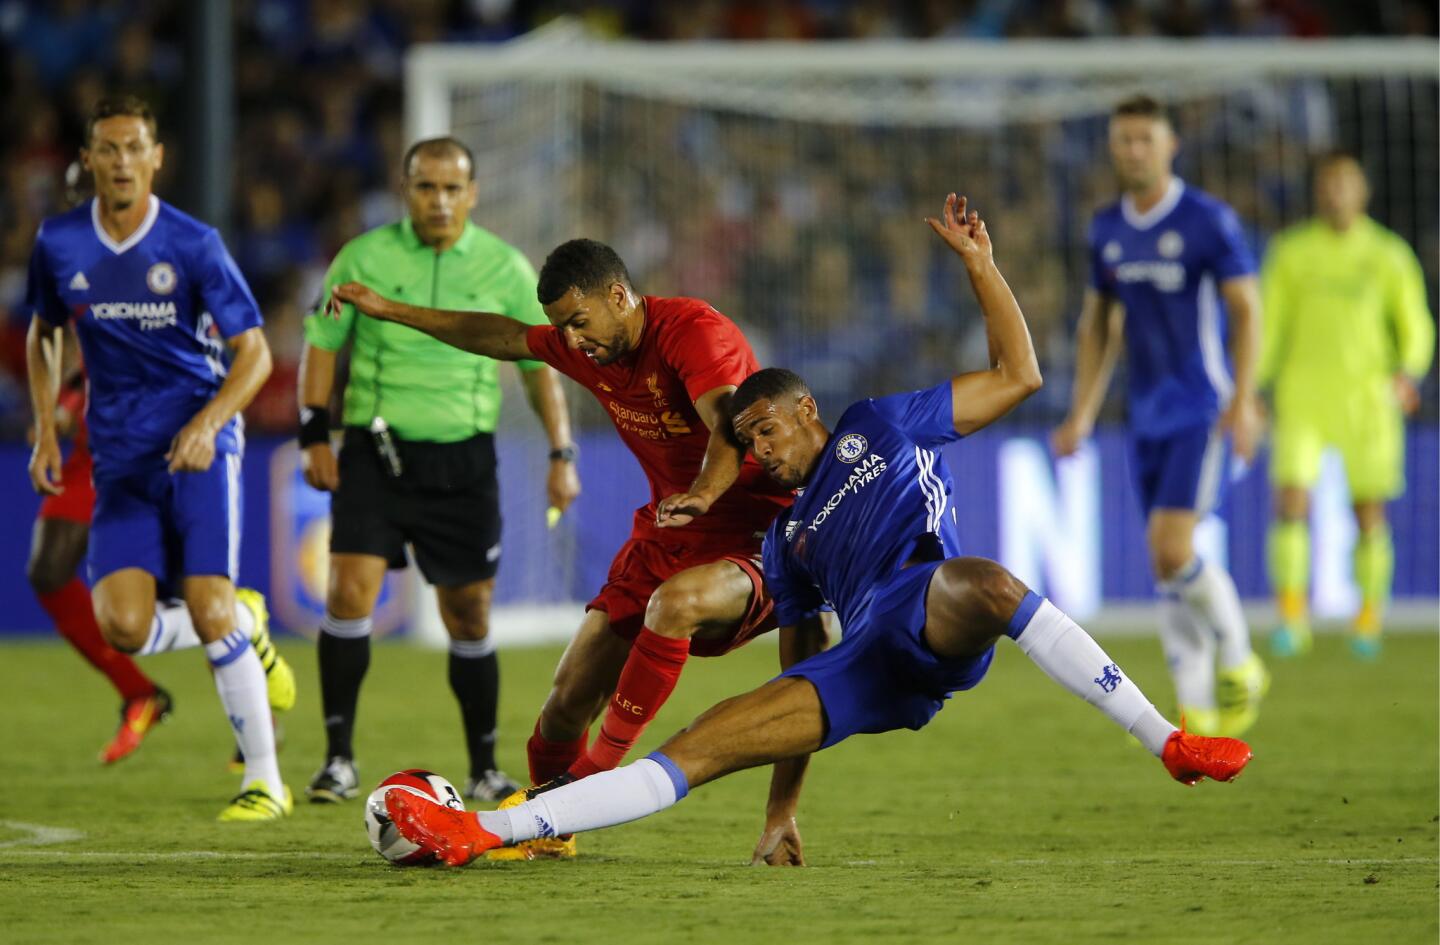 Football - Liverpool v Chelsea - International Champions Cup - Rose Bowl, Pasadena, California, United States of America - 27/7/16 Chelsea's Ruben Loftus-Cheek (R) in action with Liverpool's Kevin Stewart Reuters / Mike Blake Livepic ** Usable by SD ONLY **